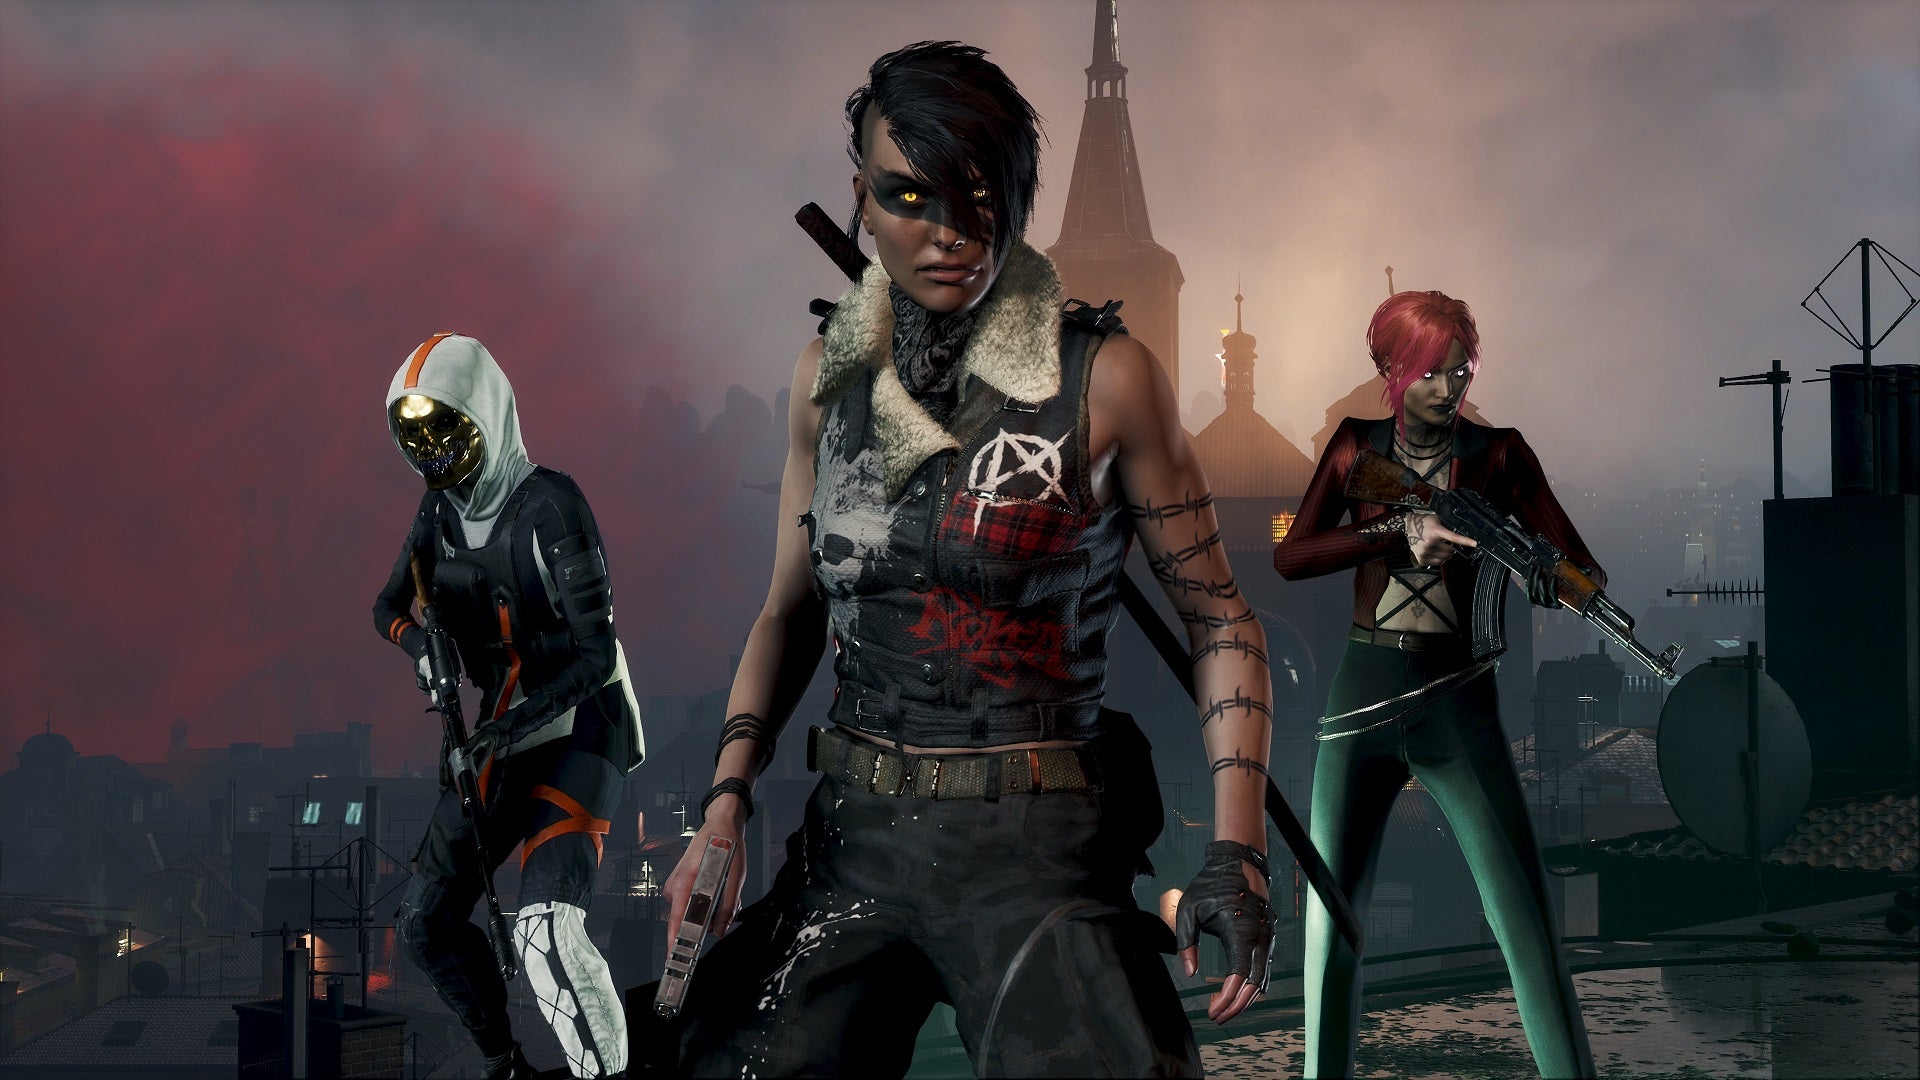 Three vampires in different outfits, facing the camera. A mix of punk, modern, and high tech.